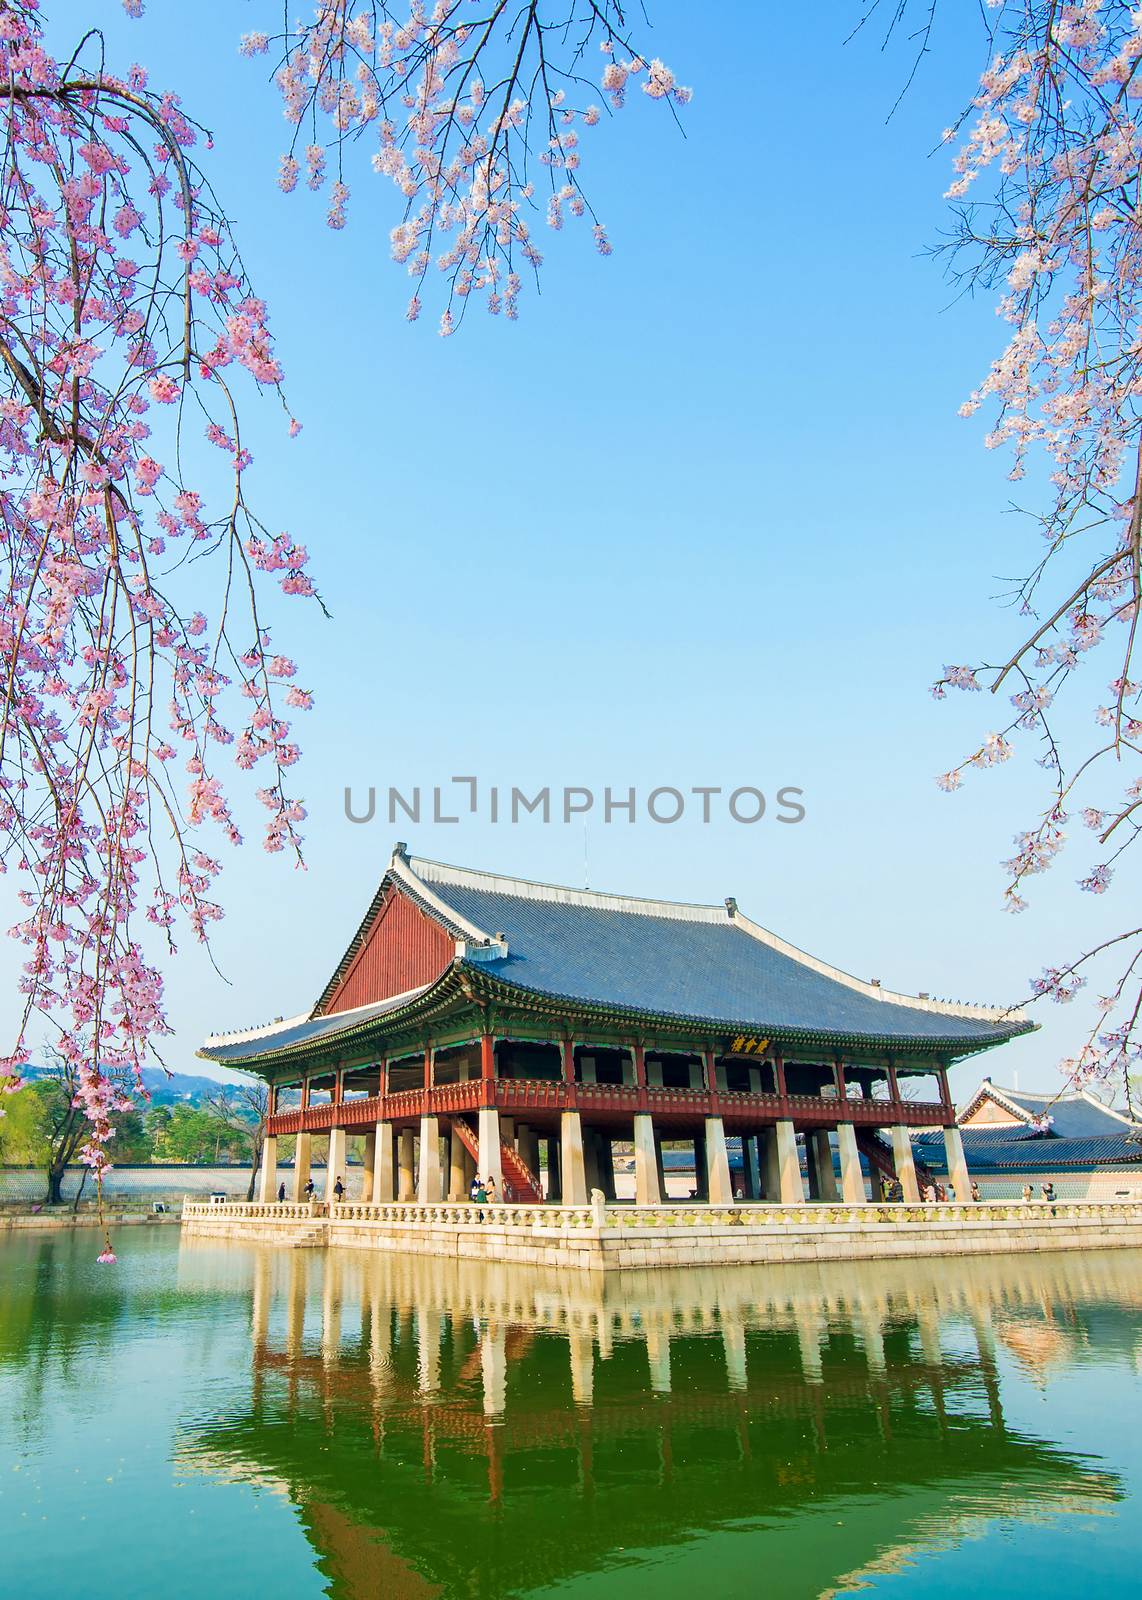 Gyeongbokgung Palace with cherry blossom in spring,Korea. by gutarphotoghaphy